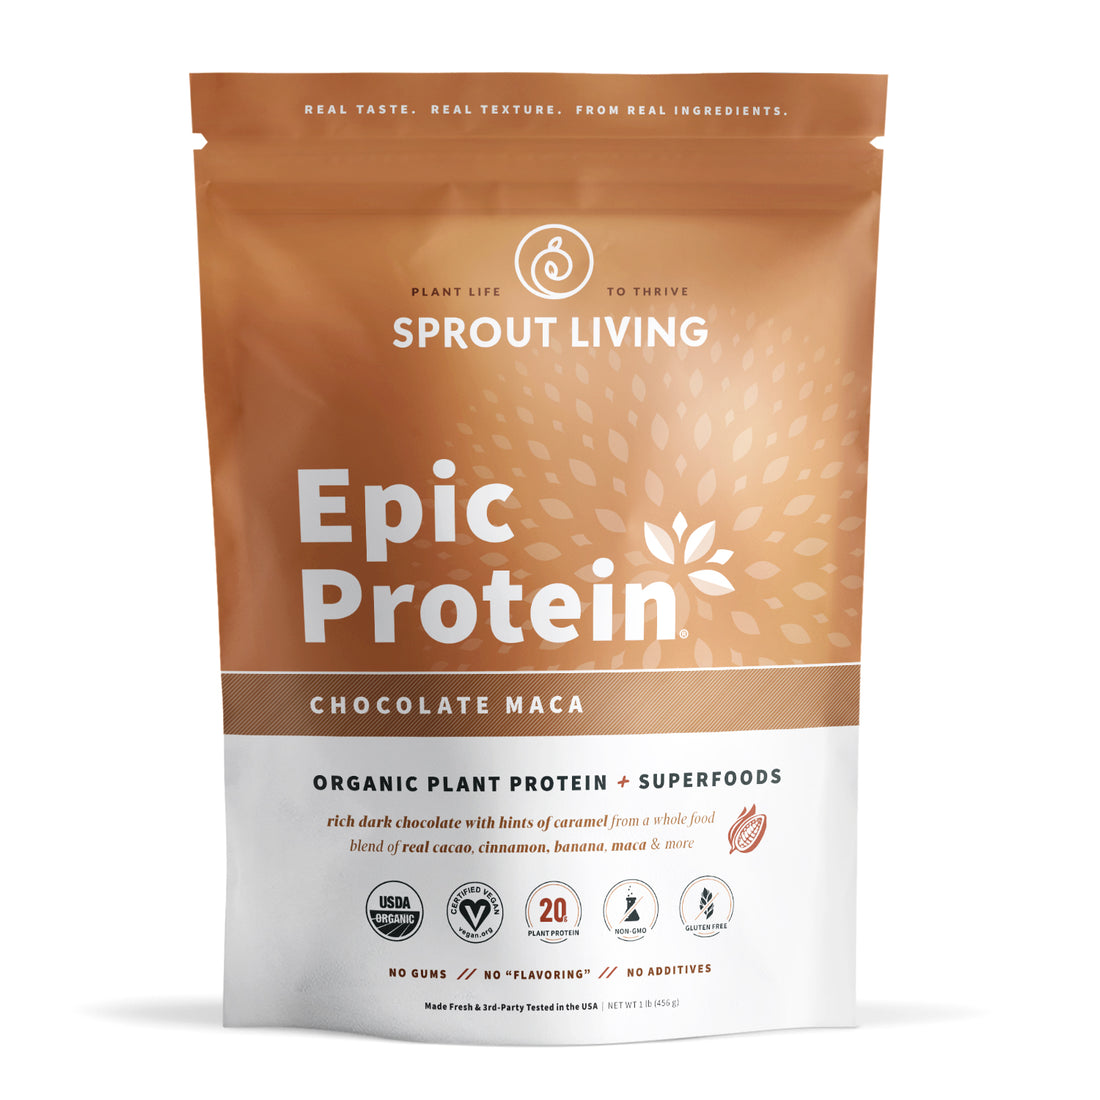 sprout-living-protein-chocolate-maca-front-202311